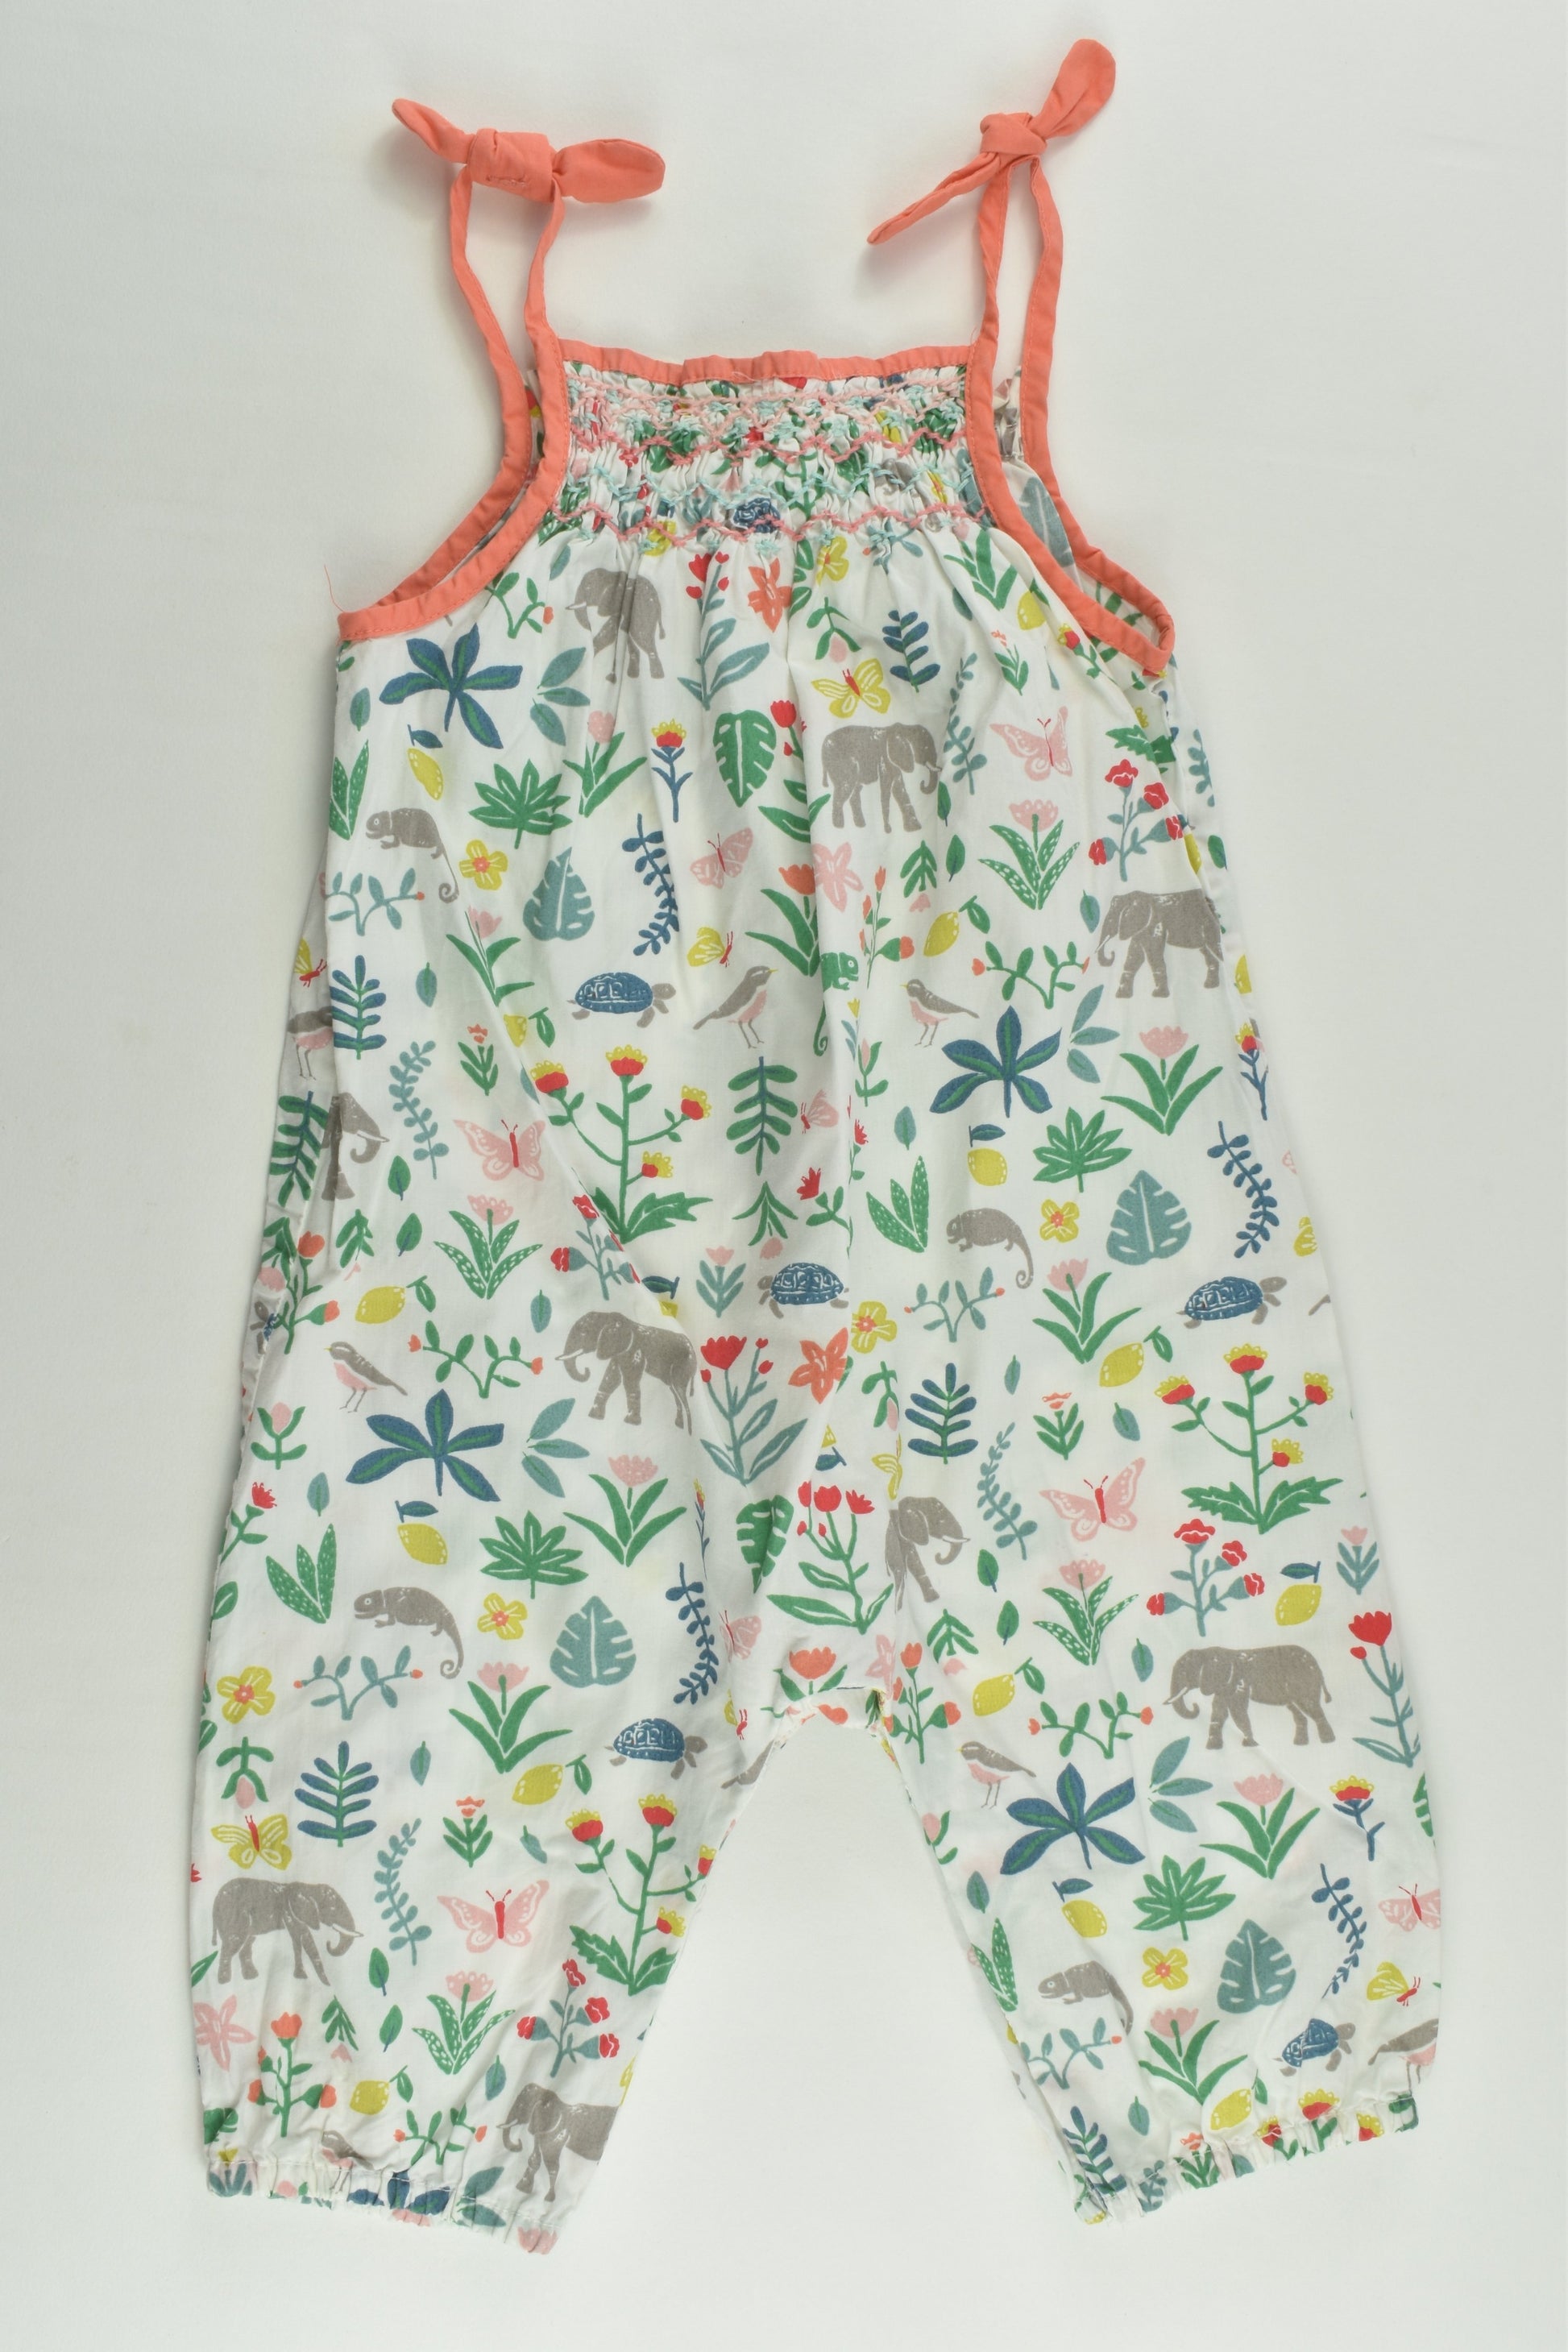 Baby Boden Size 00 (3-6 months) Lightweight Animals and Plants Playsuit